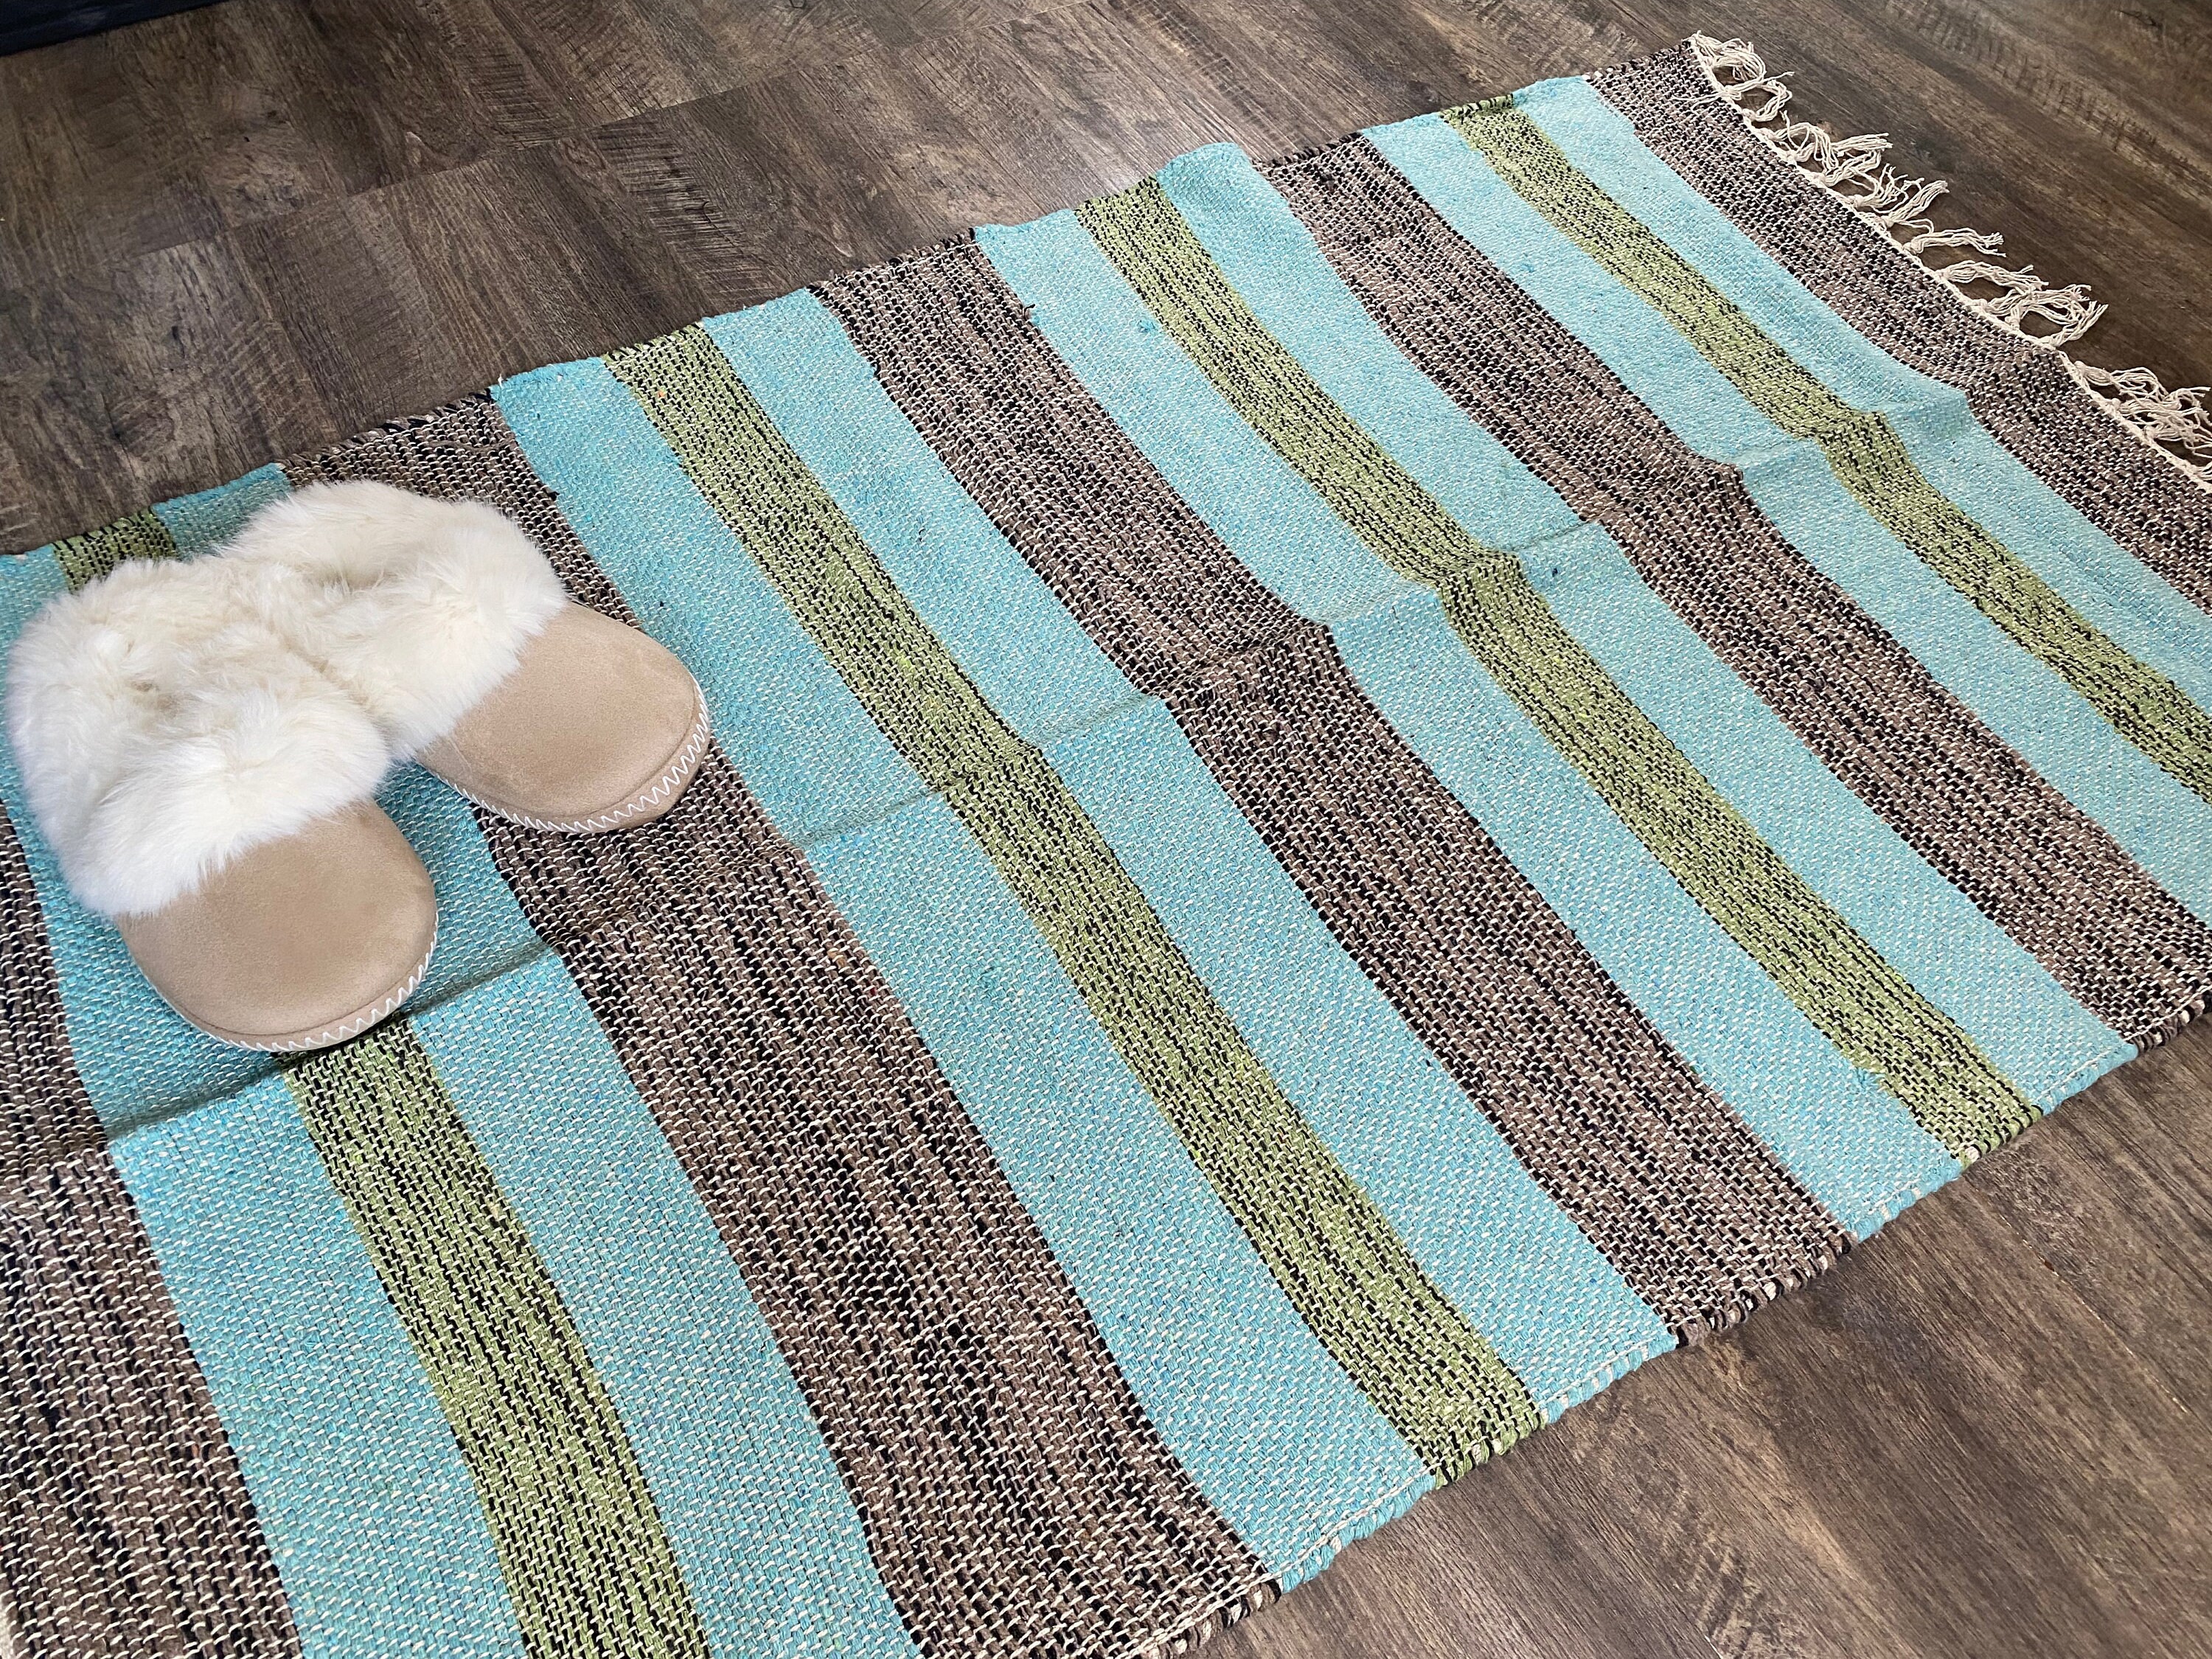 Hebe Extra Long Bath Area Rug Runner For Bathroom Extra Large